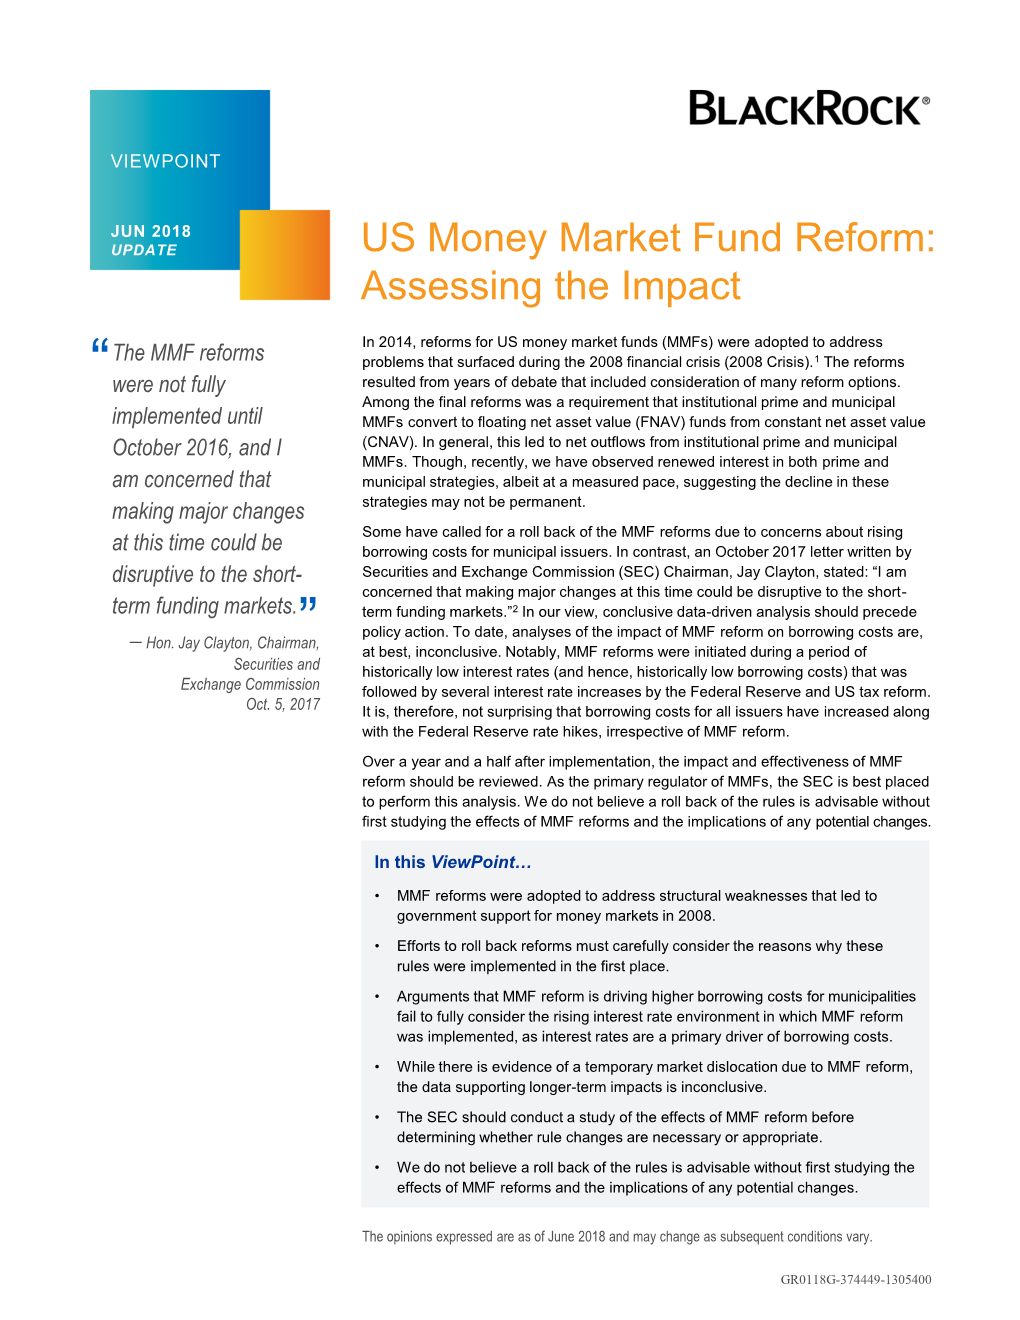 US Money Market Fund Reform: Assessing the Impact